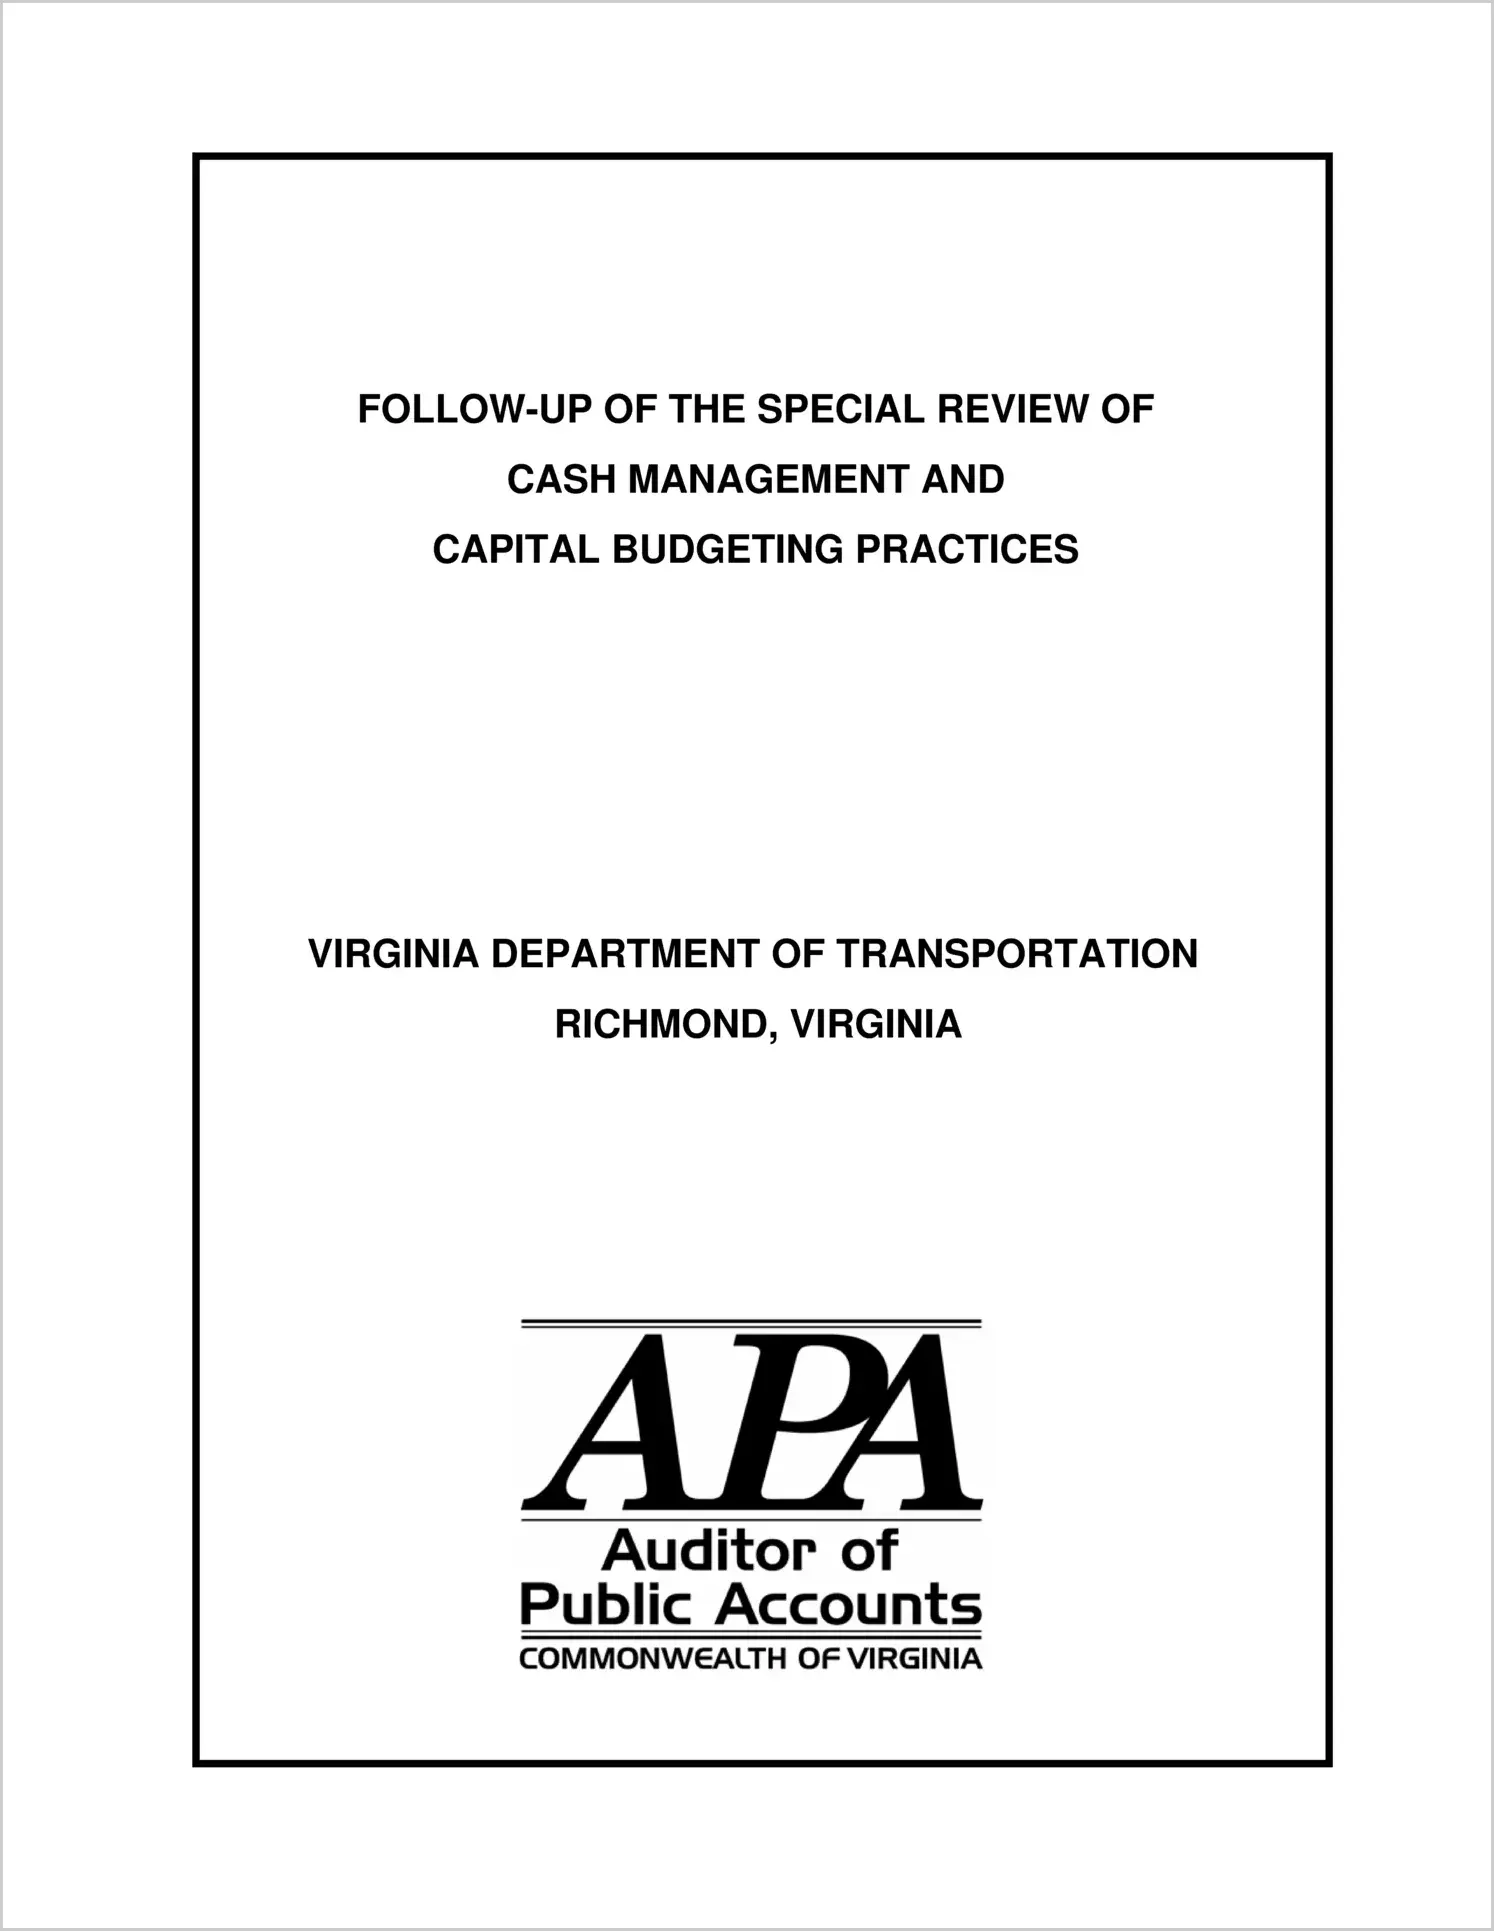 Special ReportFollow-up of the Special Review of the Cash Management and Capital Budgeting Practices in the Virginia Department of Transportation(Report Date: 12/2004)